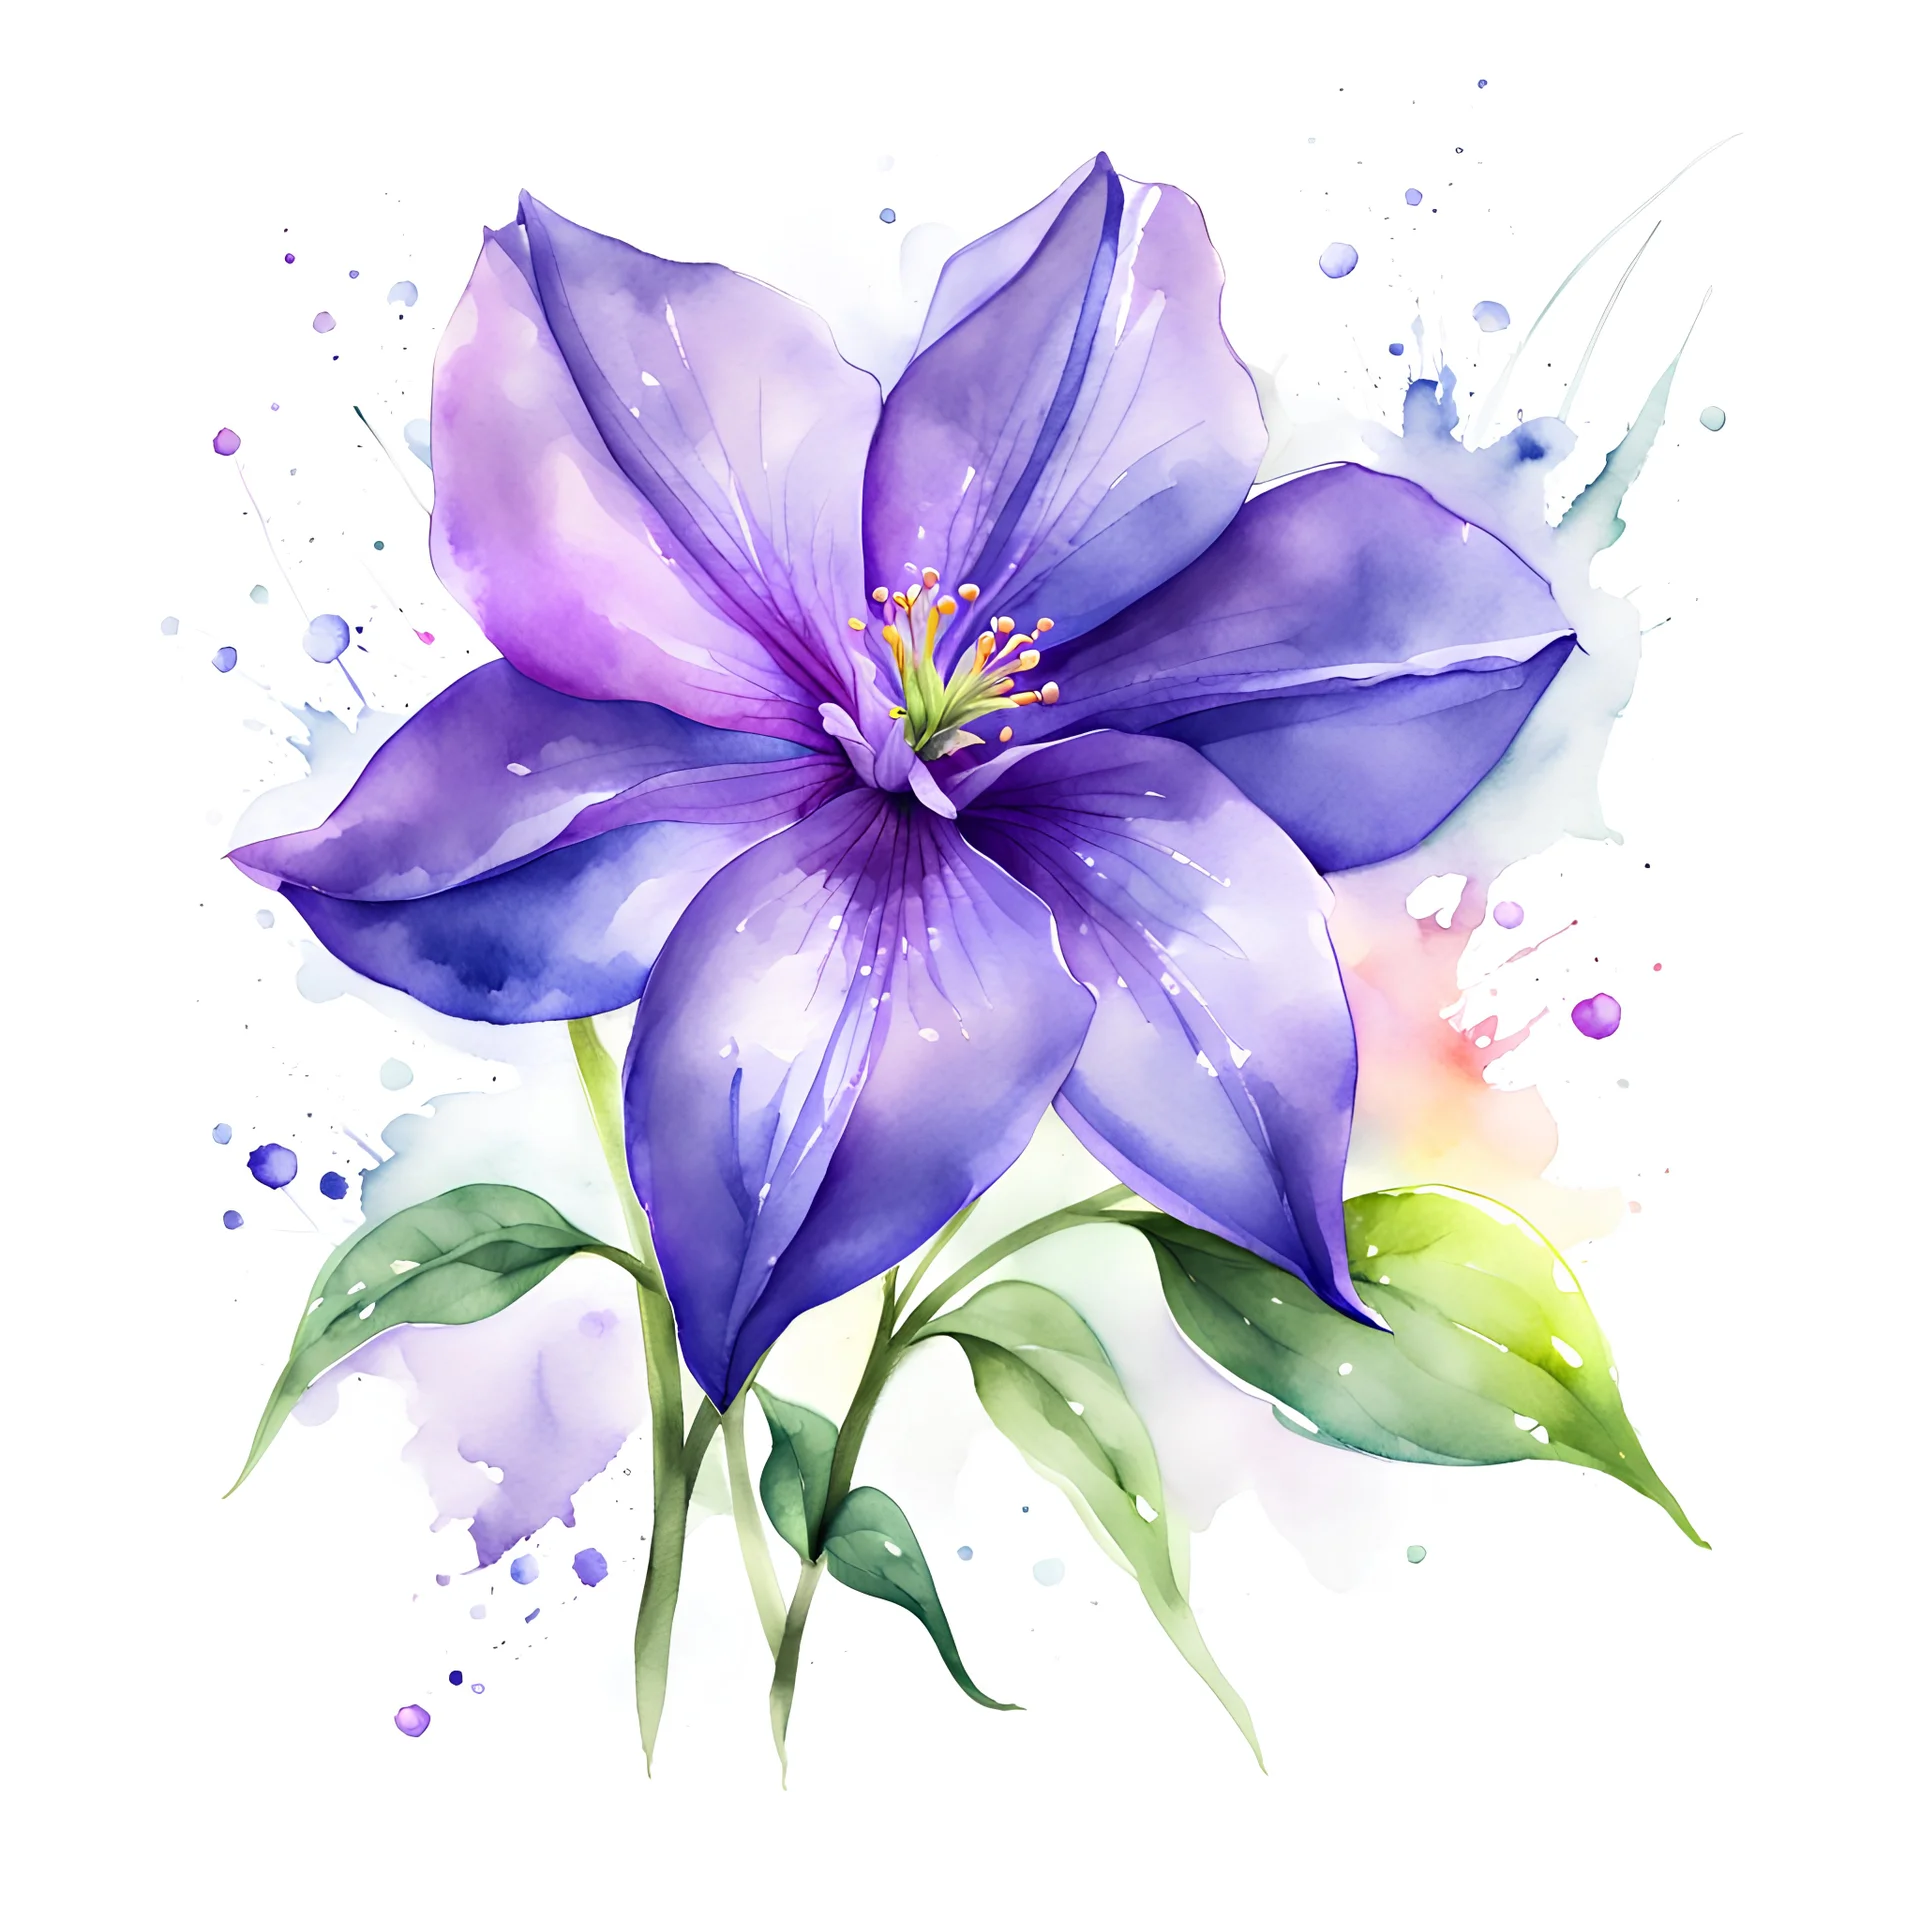 watercolor drawing of a bell flower on a white background, Trending on Artstation, {creative commons}, fanart, AIart, {Woolitize}, by Charlie Bowater, Illustration, Color Grading, Filmic, Nikon D750, Brenizer Method, Perspective, Depth of Field, Field of View, F/2.8, Lens Flare, Tonal Colors, 8K, Full-HD, ProPhoto RGB, Perfectionism, Rim Lighting, Natural Lighting, Soft Lig